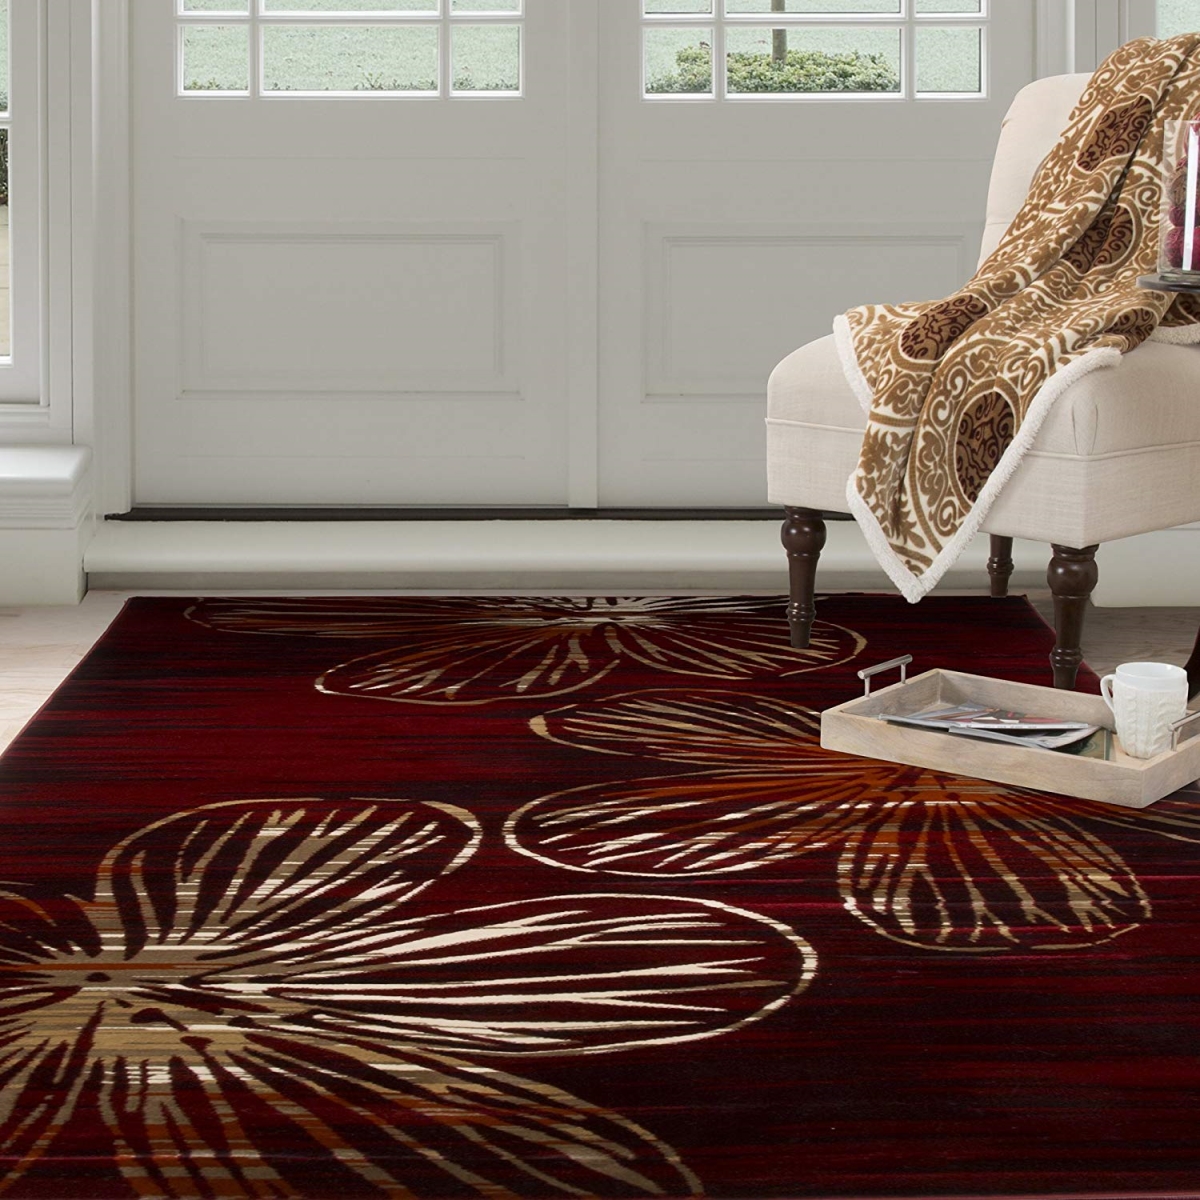 62a-26783 Opus Modern Floral Area Rug, 3 Ft. 3 In. X 5 Ft. - Burgundy